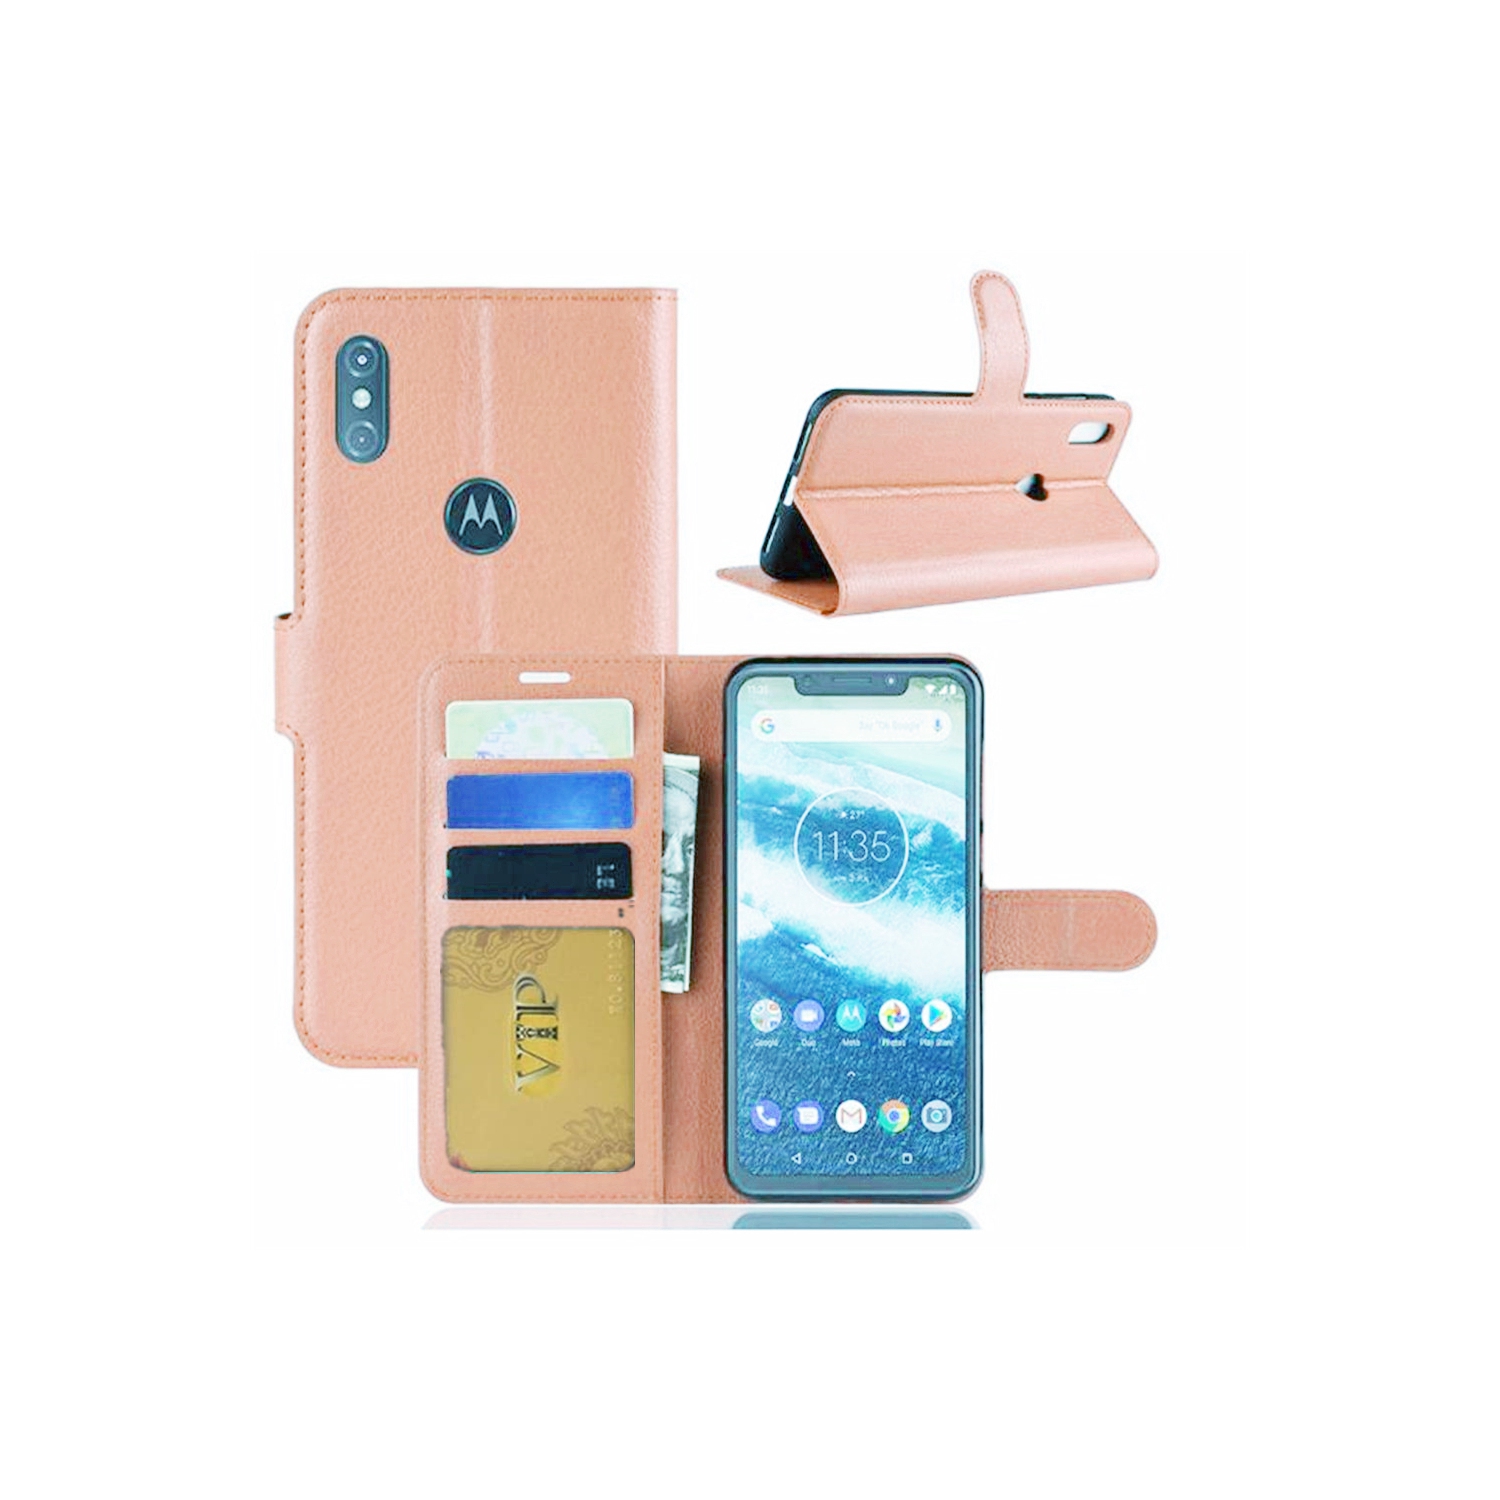 [CS] Motorola Moto One Vision Case, Magnetic Leather Folio Wallet Flip Case Cover with Card Slot, Rose Gold